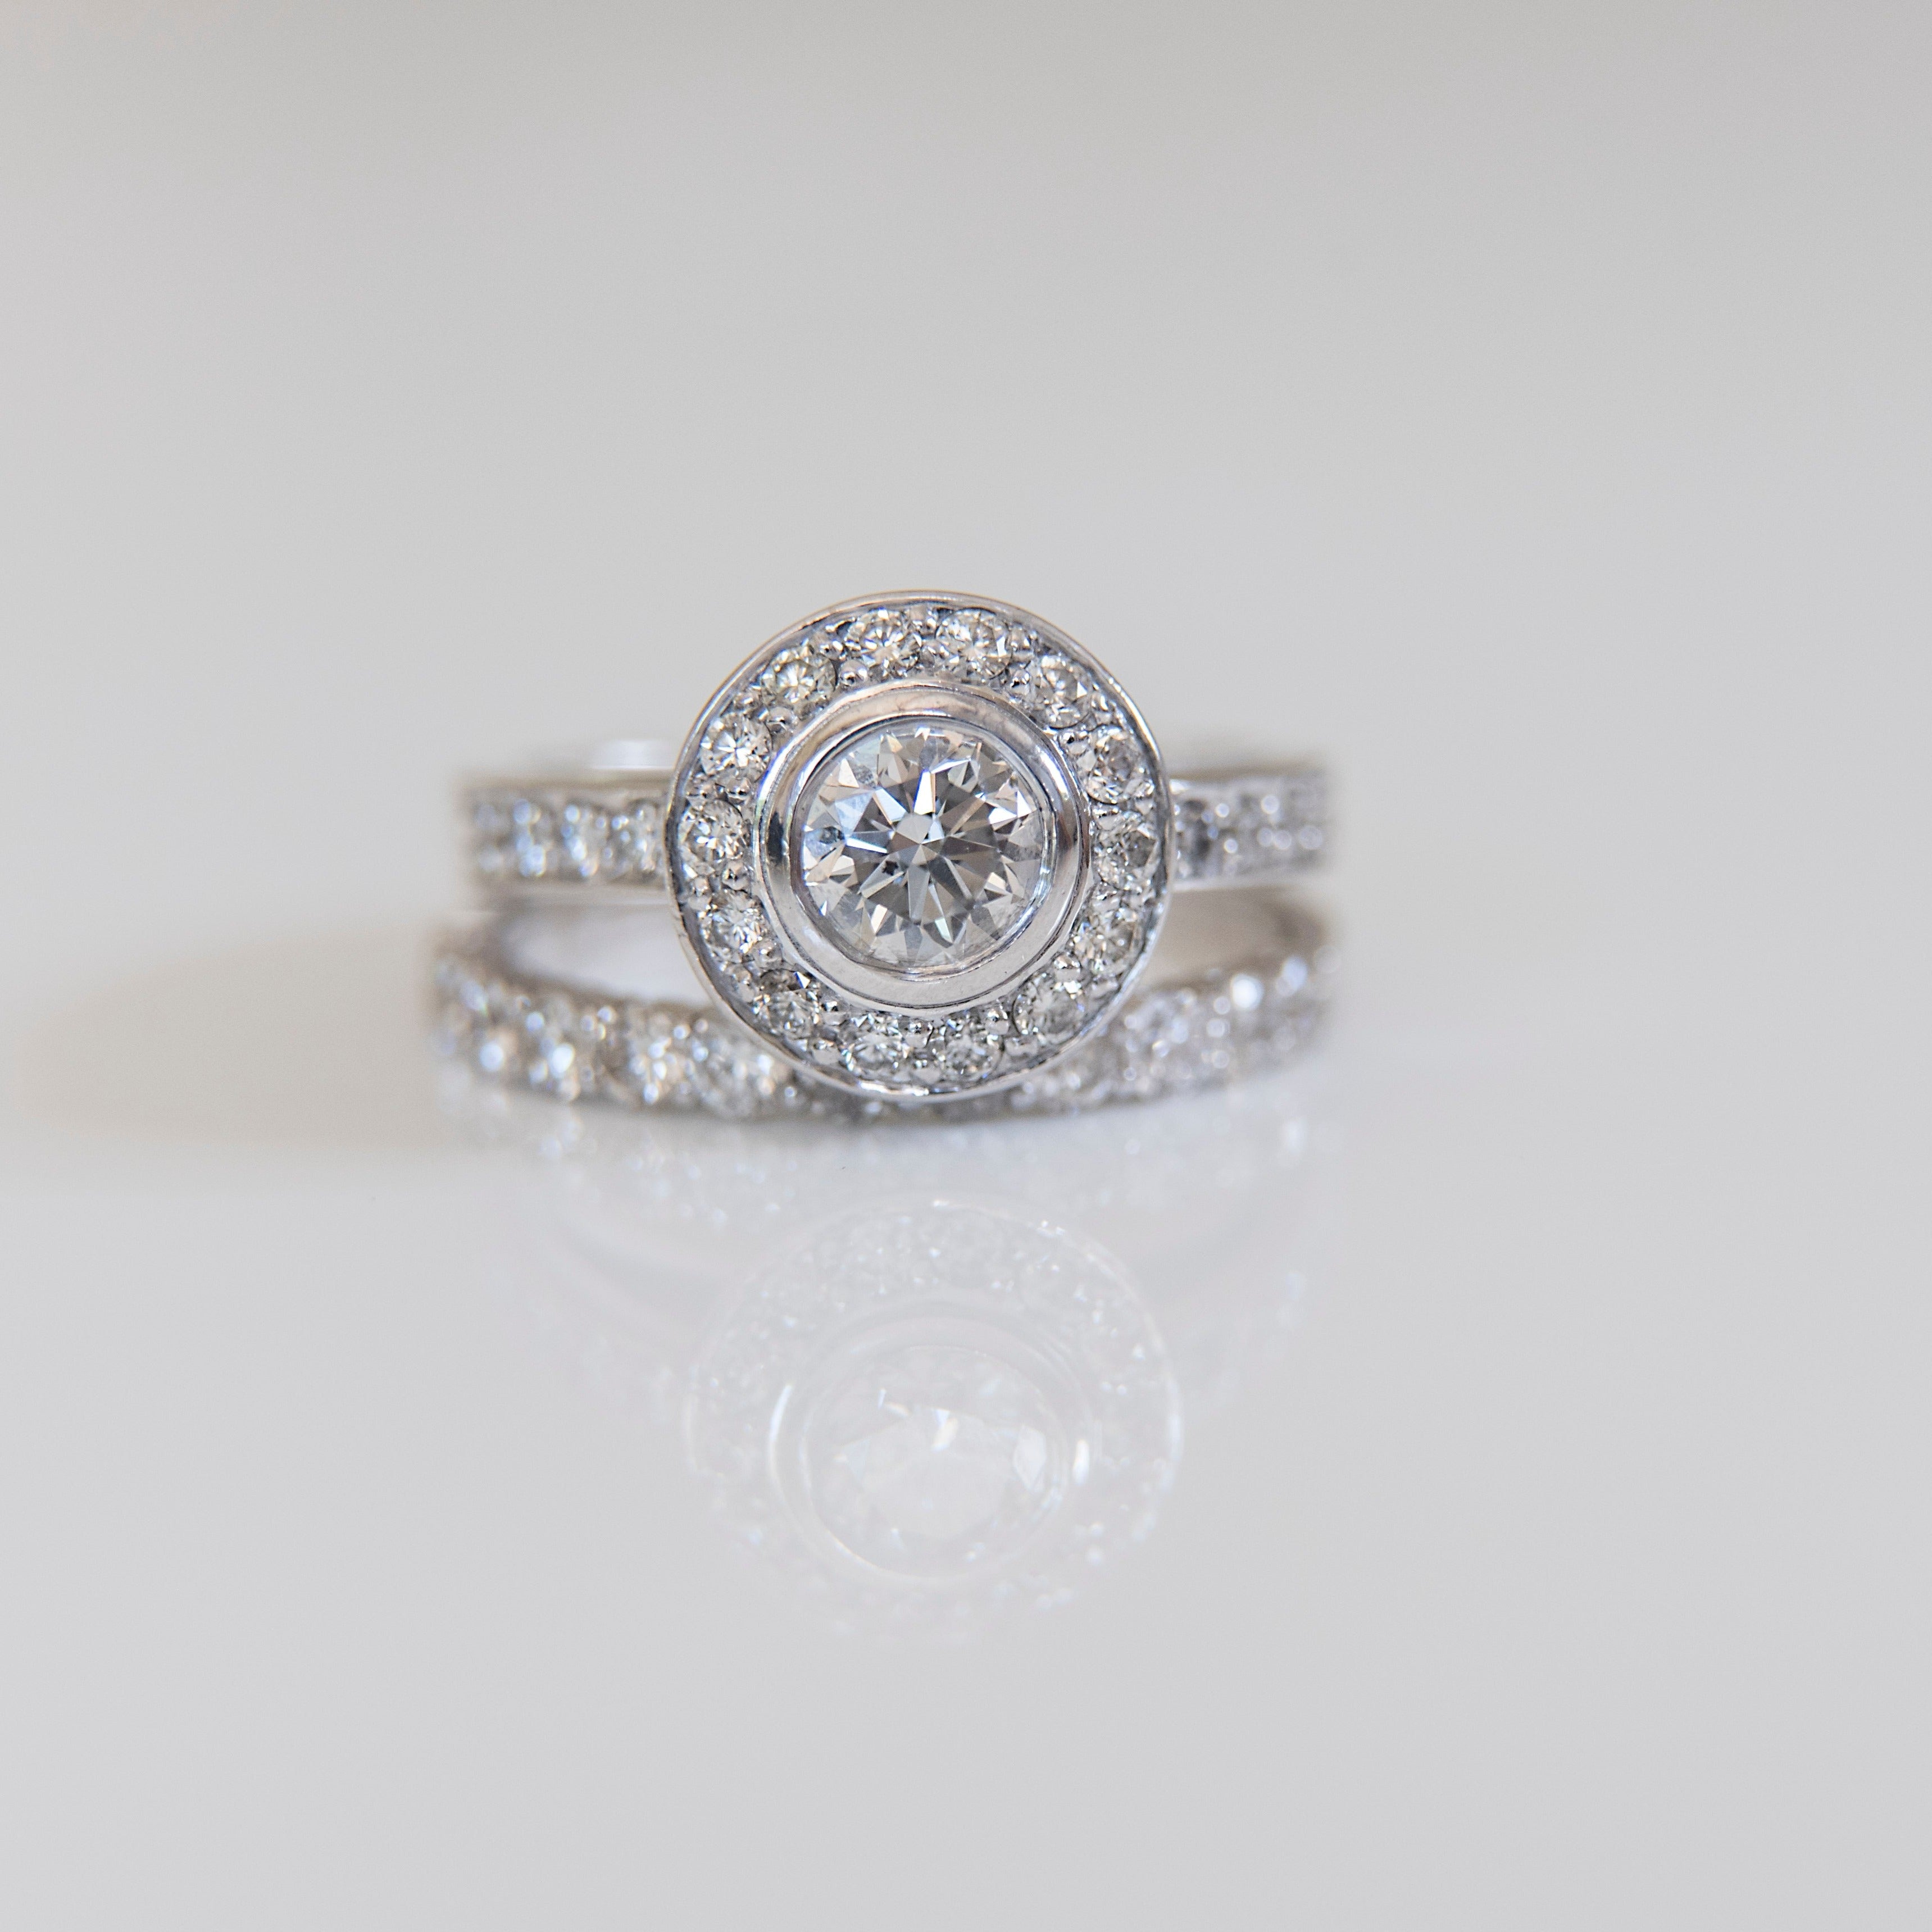  platinum ring with a 1ct cushion cut diamond as the centre stone and a halo of diamonds surrounding the centre stone as well as along the band.